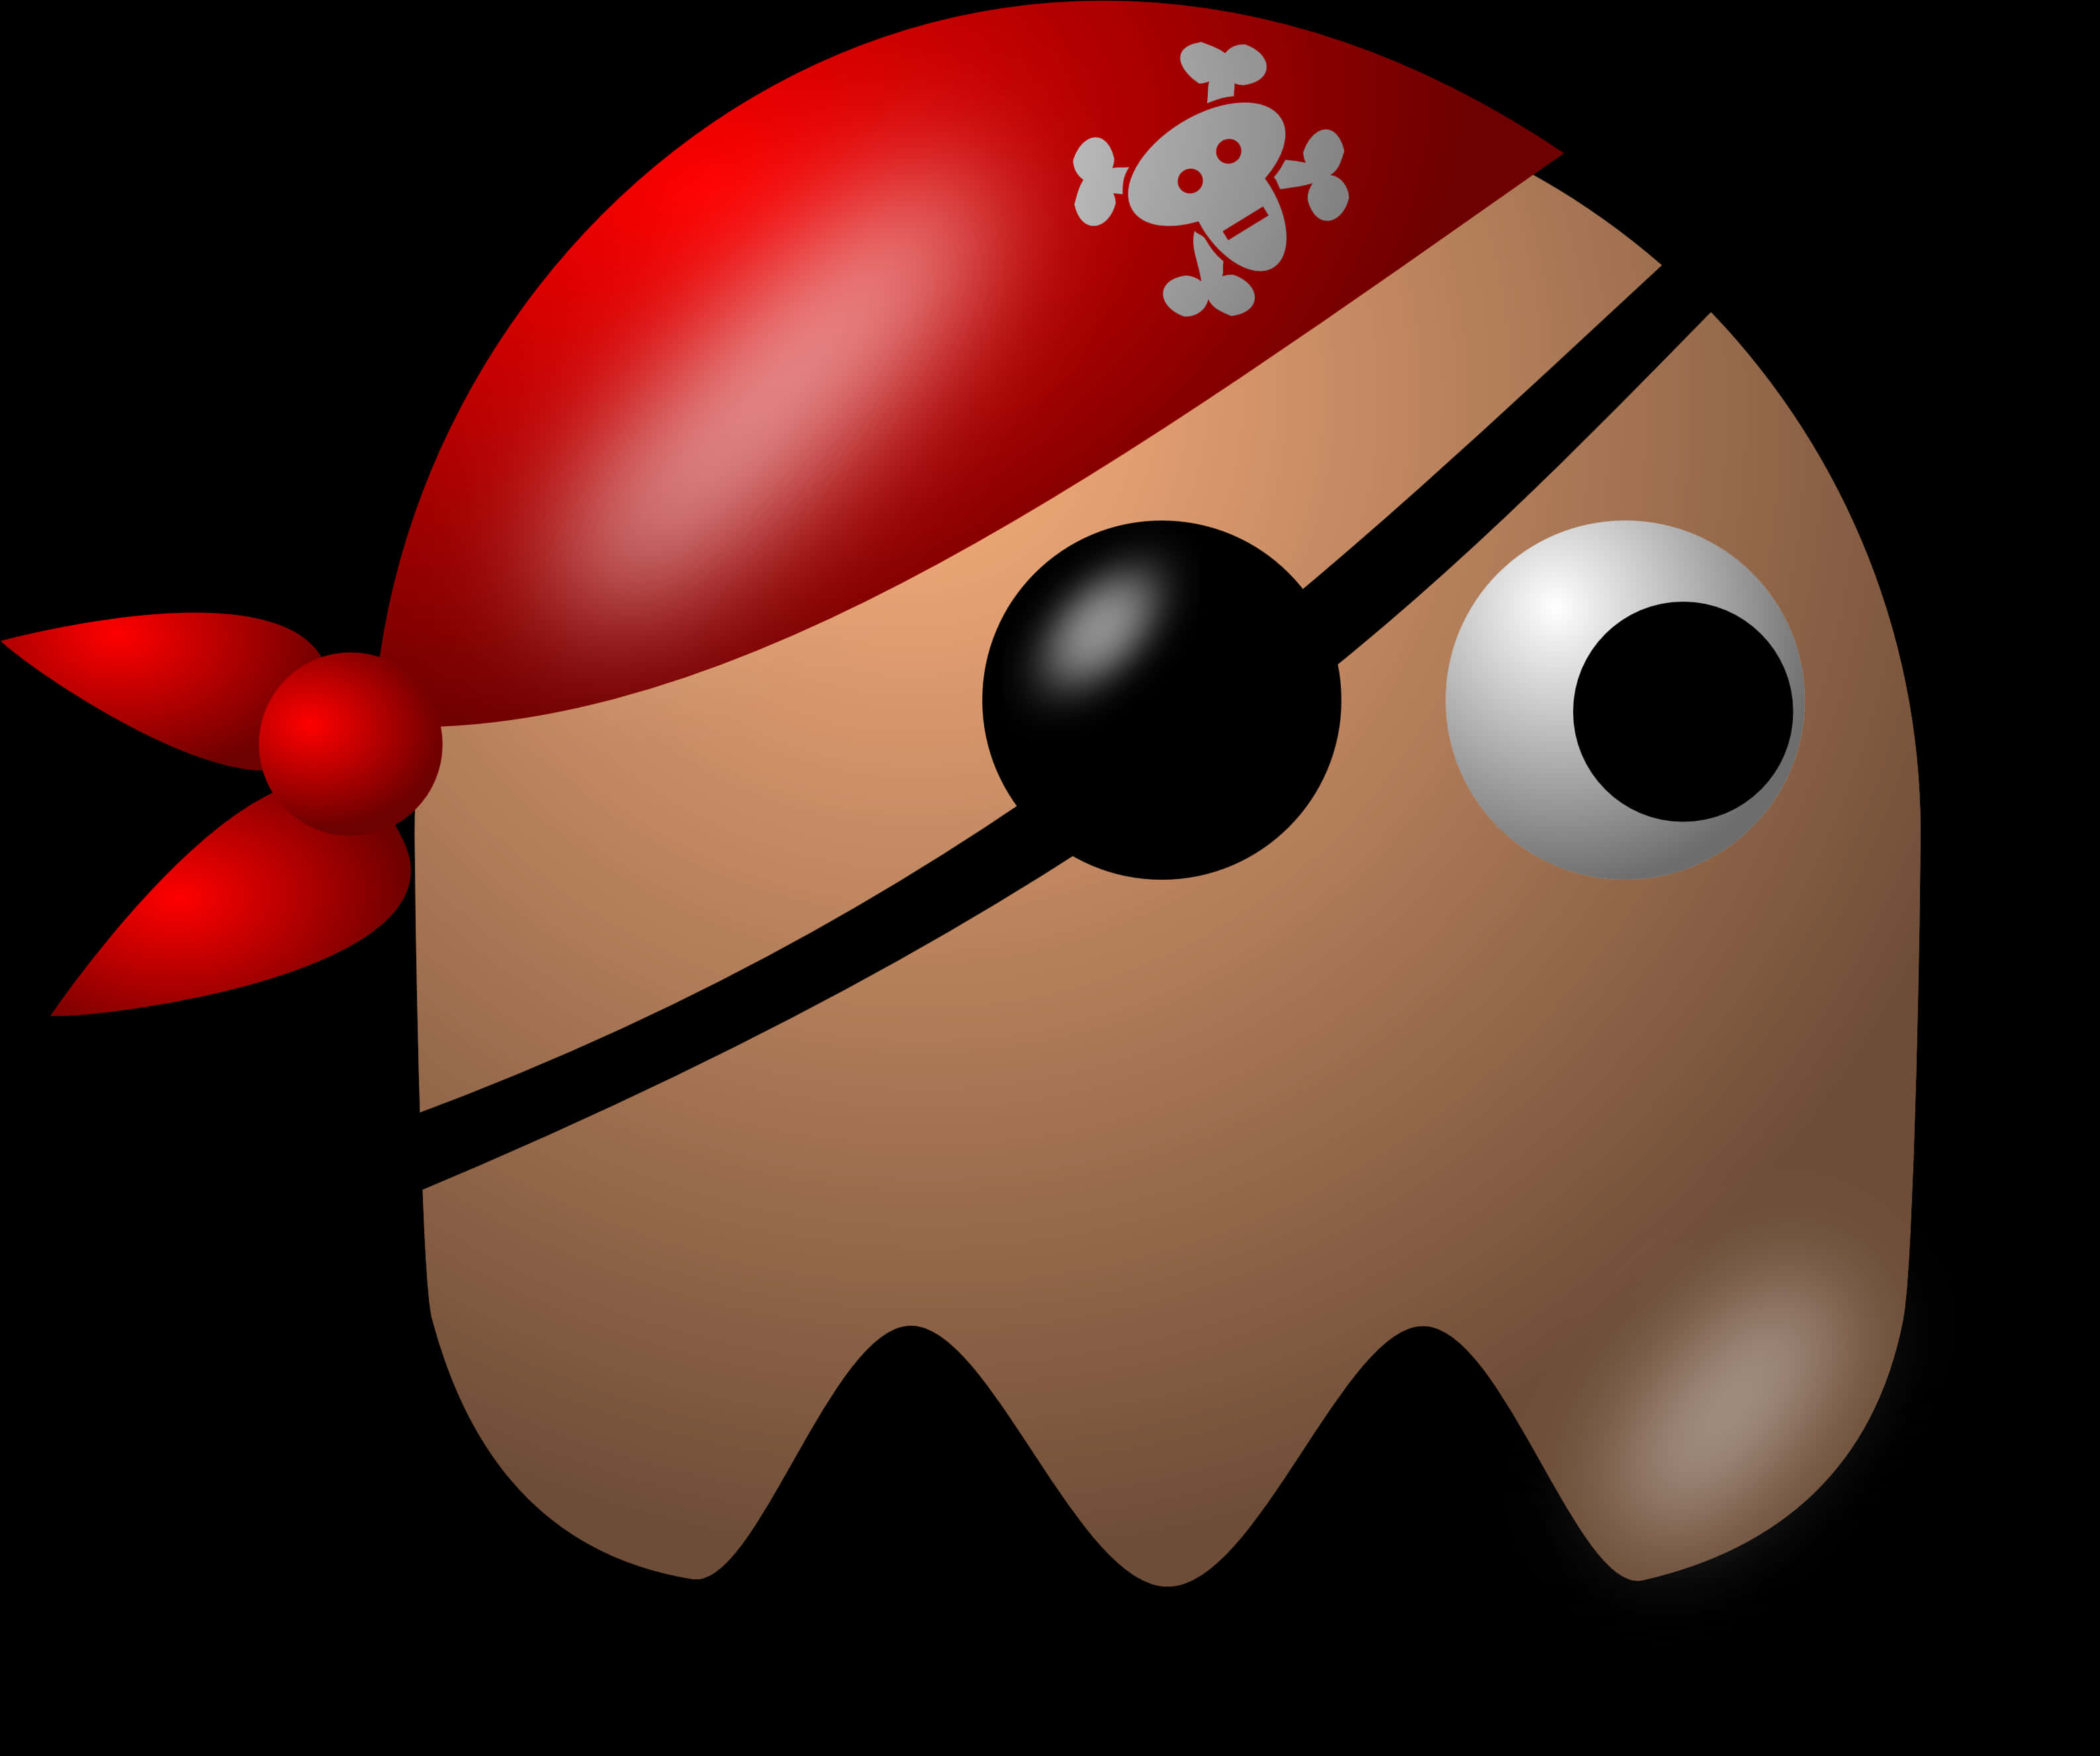 A Cartoon Character With A Bandana And Eye Patch